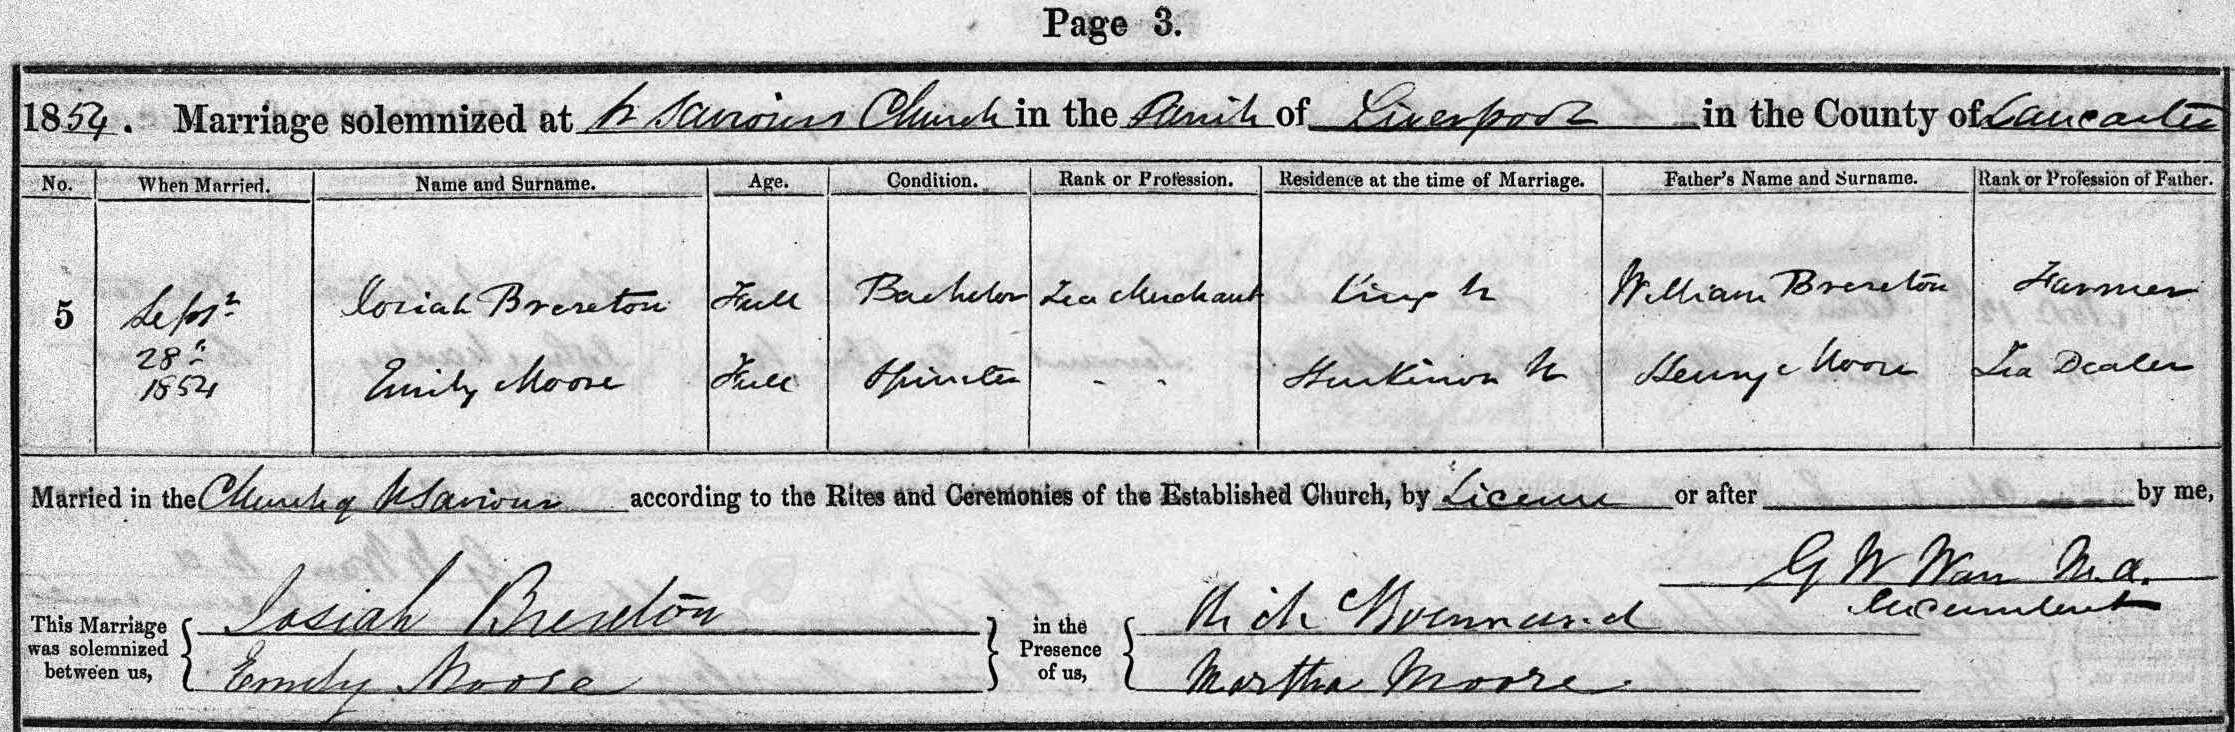 Taken on September 28th, 1854 and sourced from Certificate - Marriage.